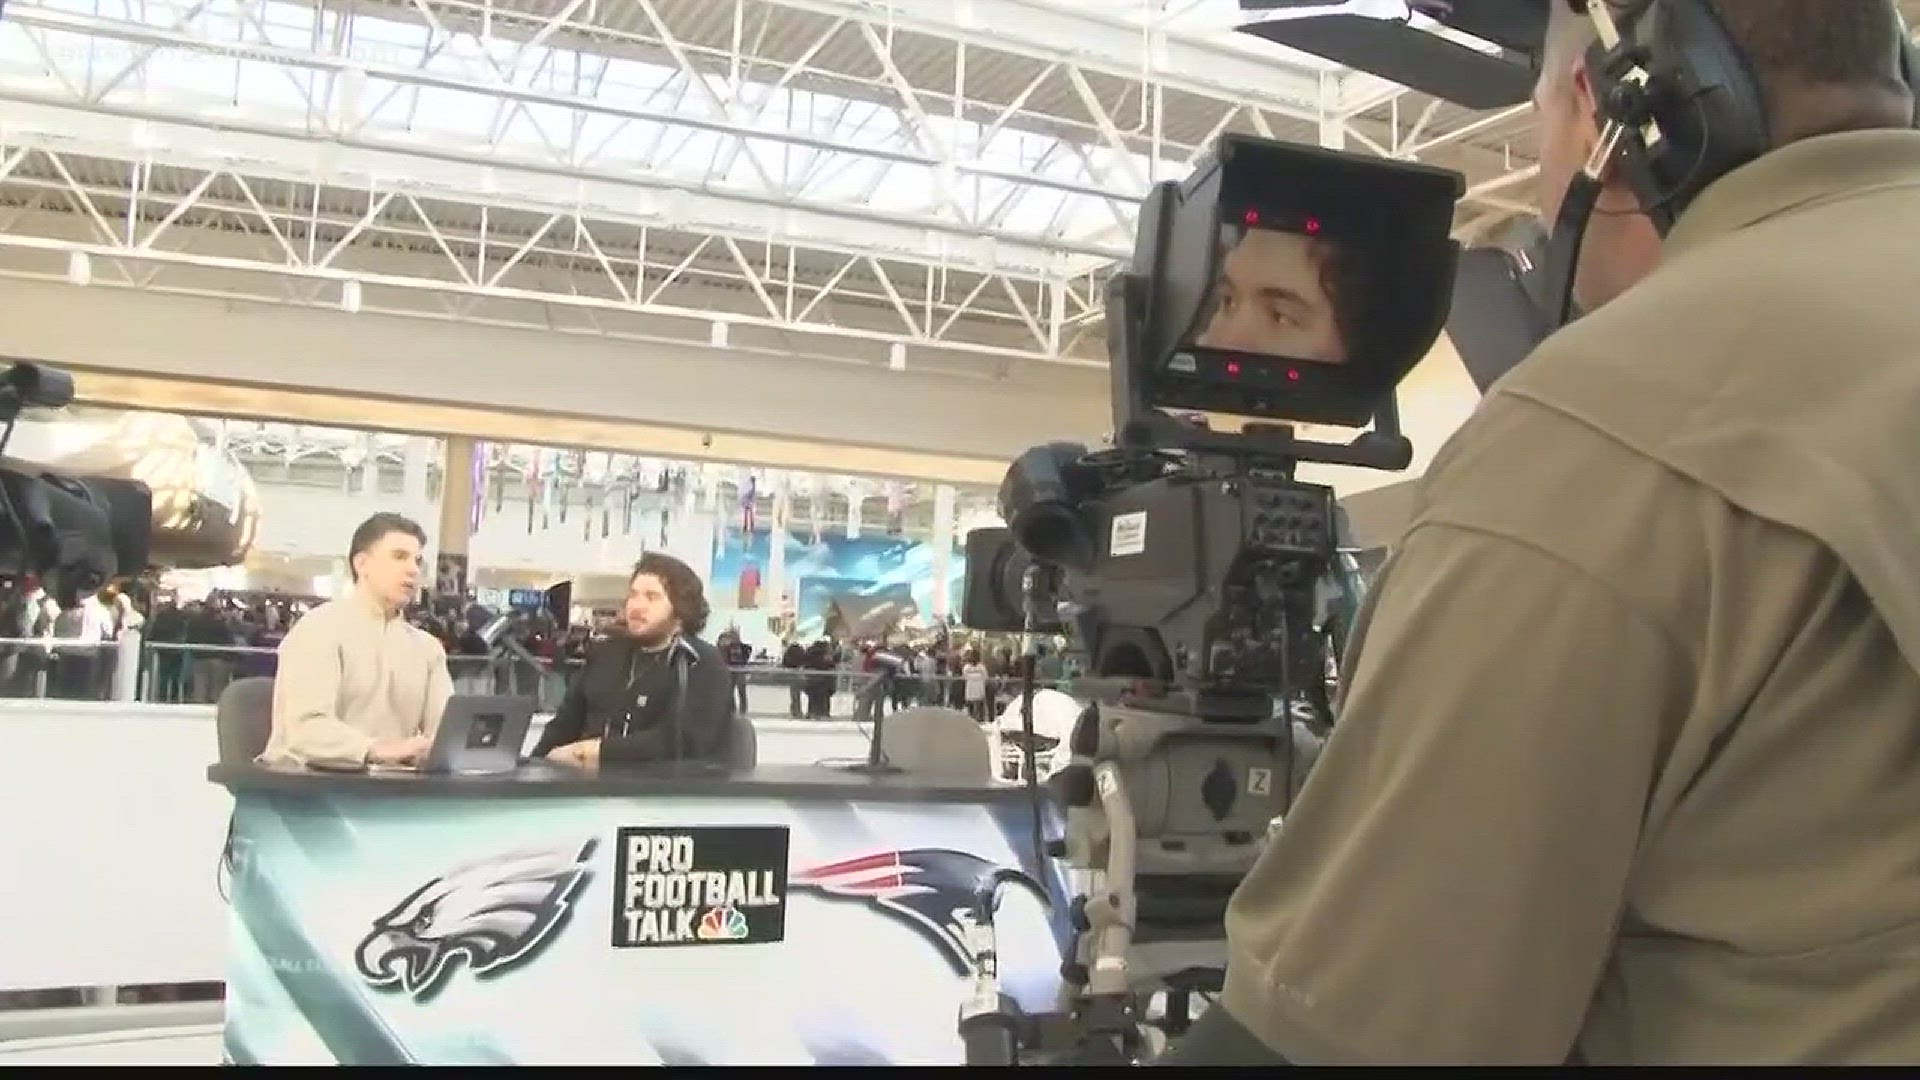 Mainers work in Minnesota for Super Bowl